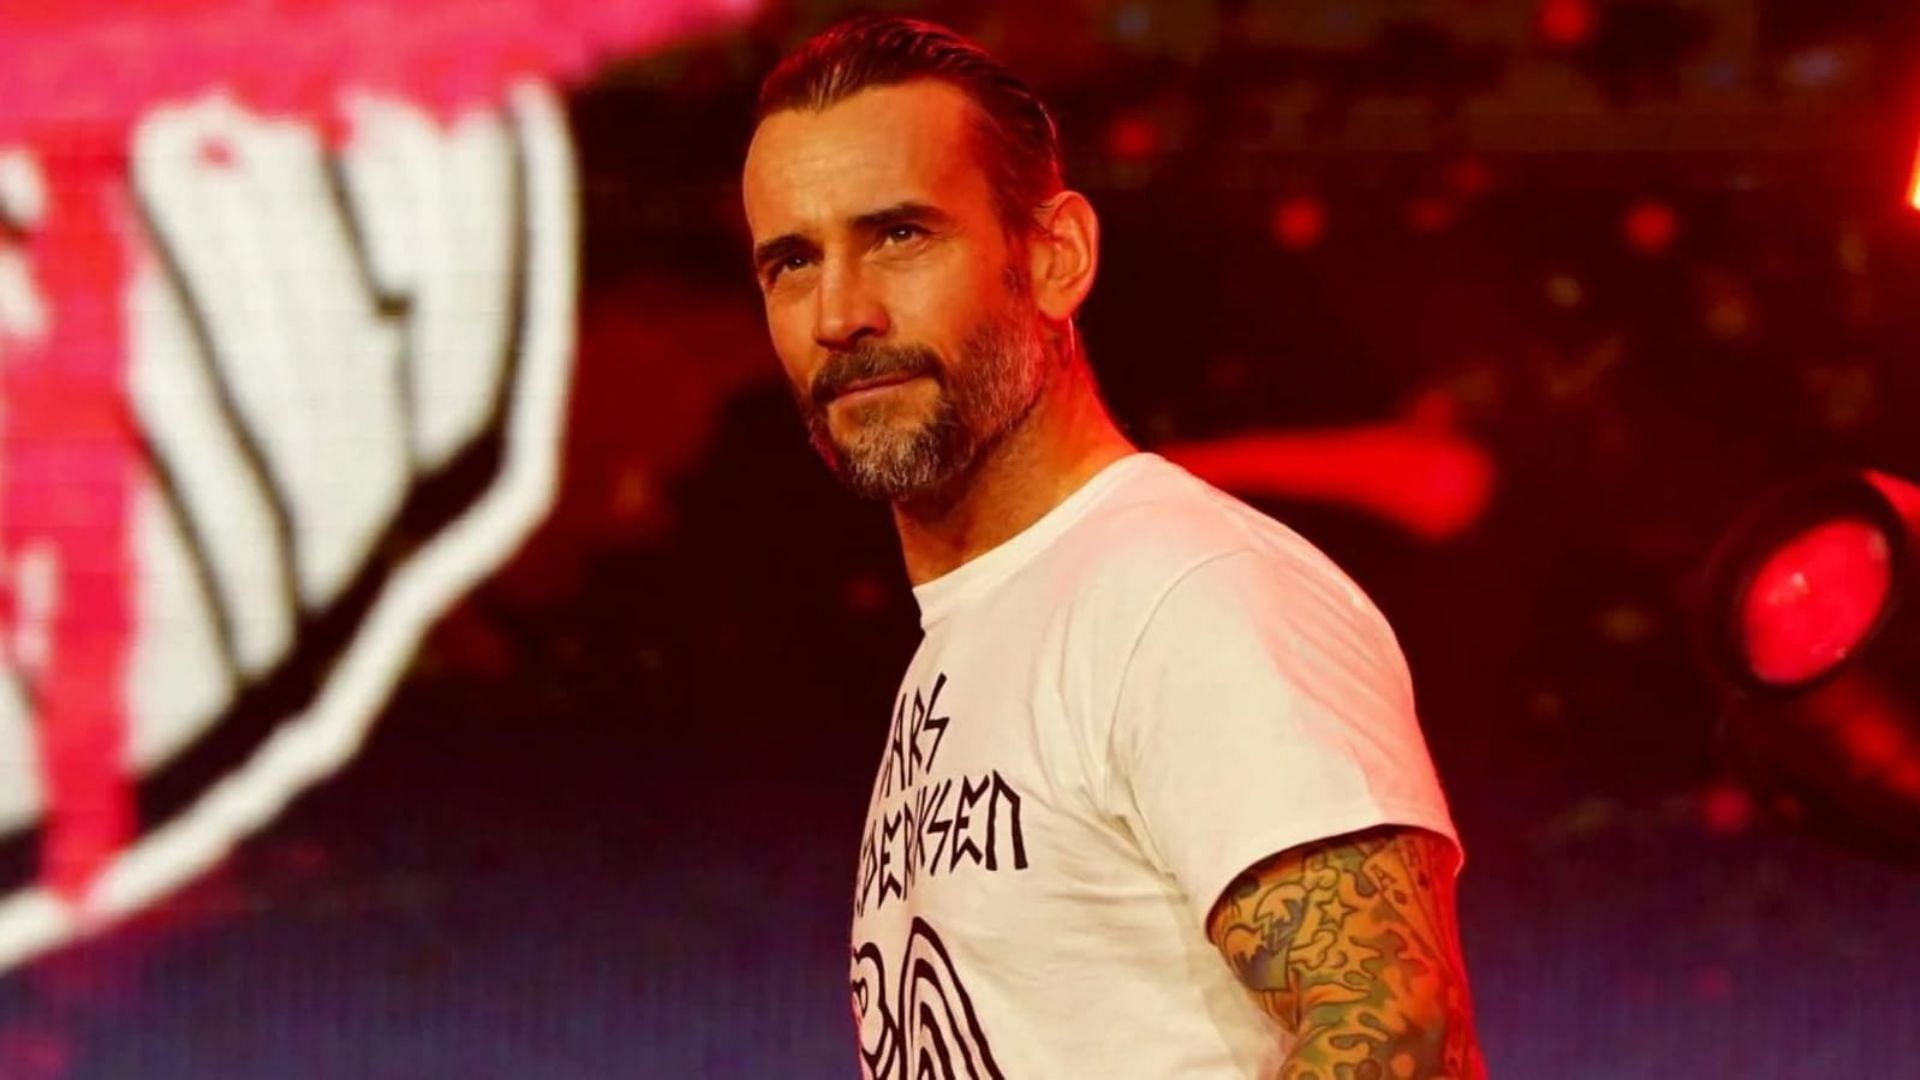 An AEW star has trademarked a CM Punk-related phrase